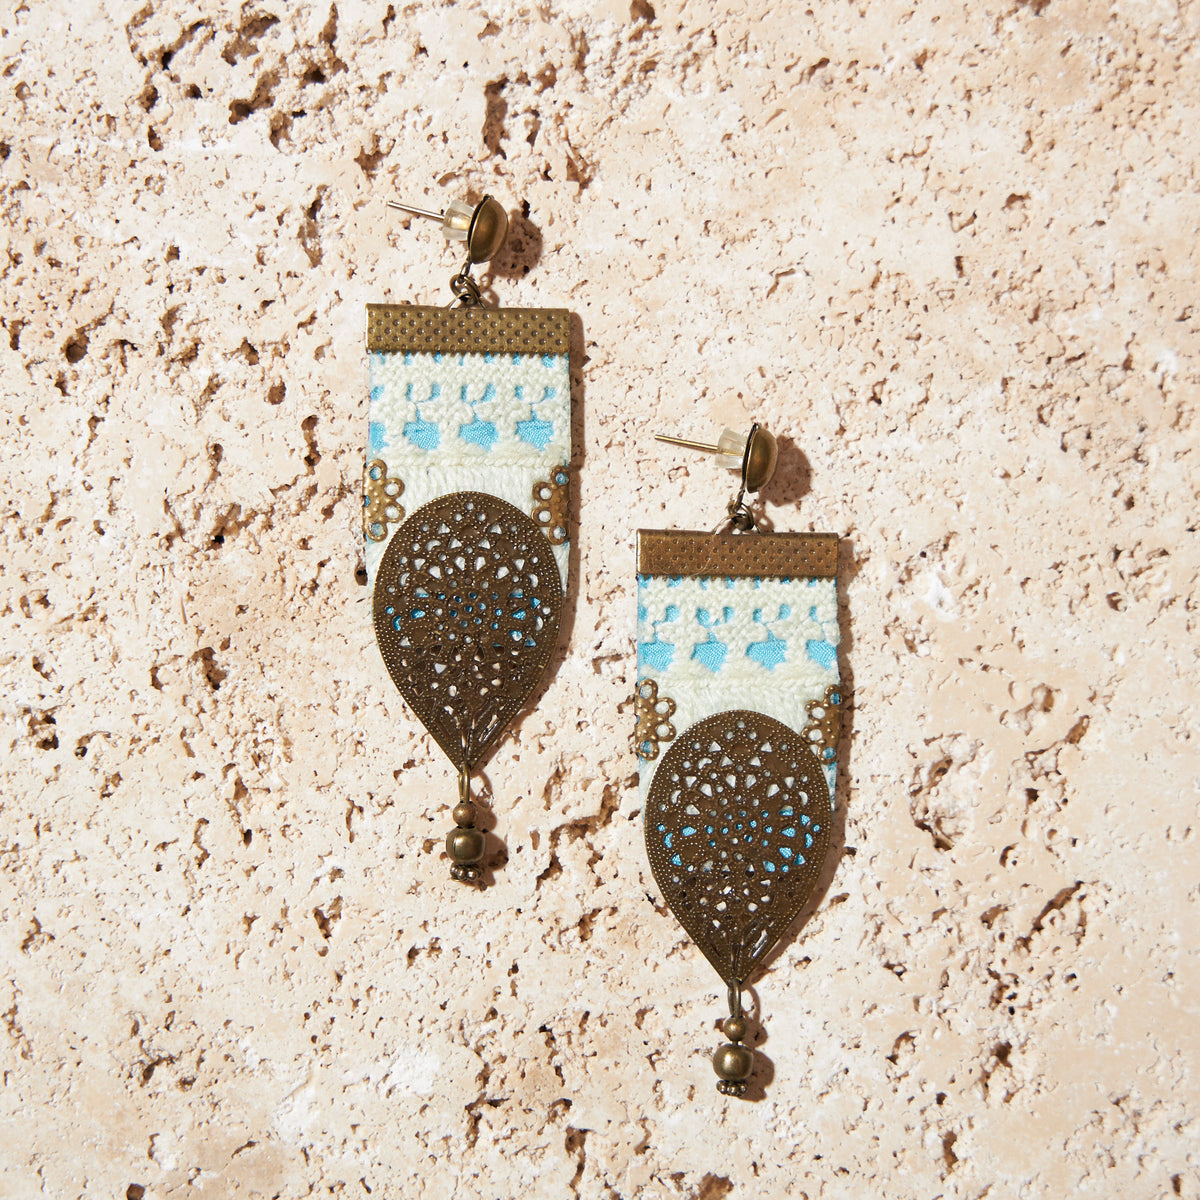 Hand Embroidery Statement Earrings with Brass Adornments - MIM3244